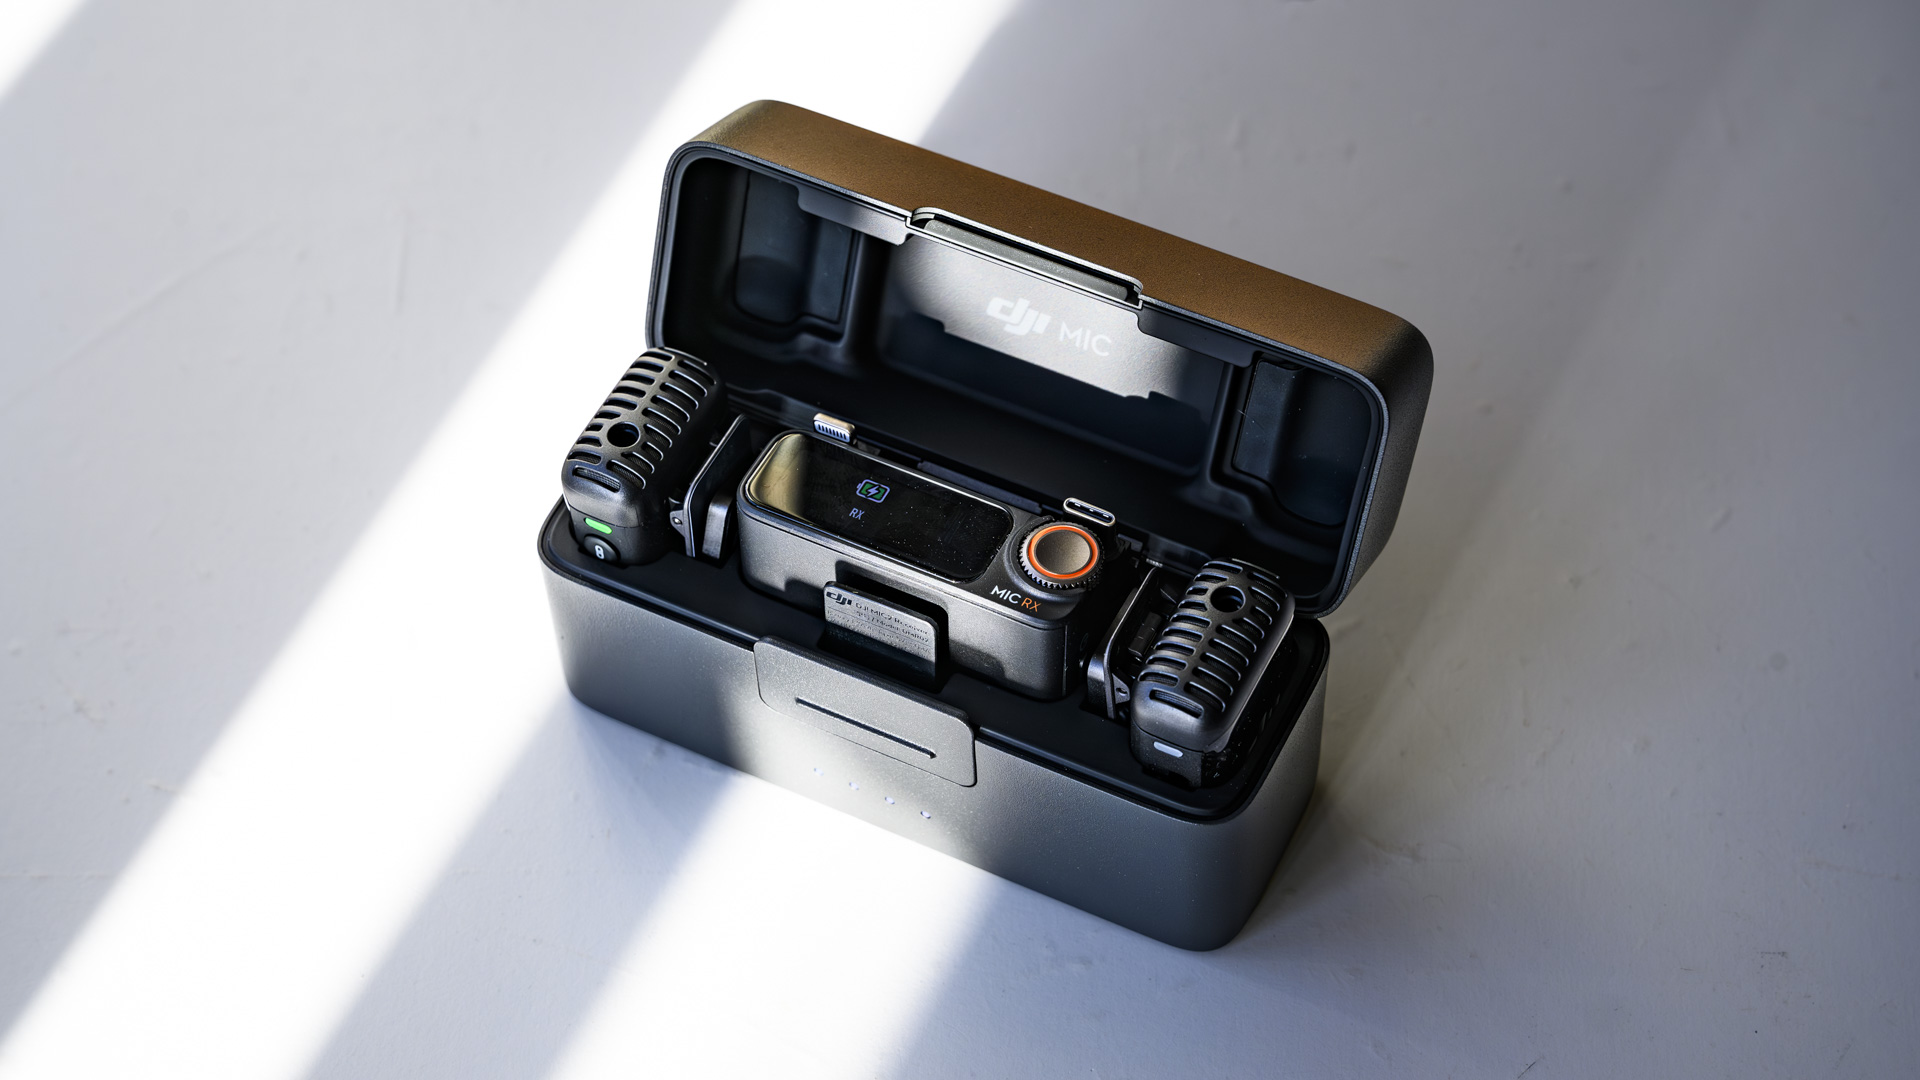 DJI Mic 2 complete kit in charging case with lid open